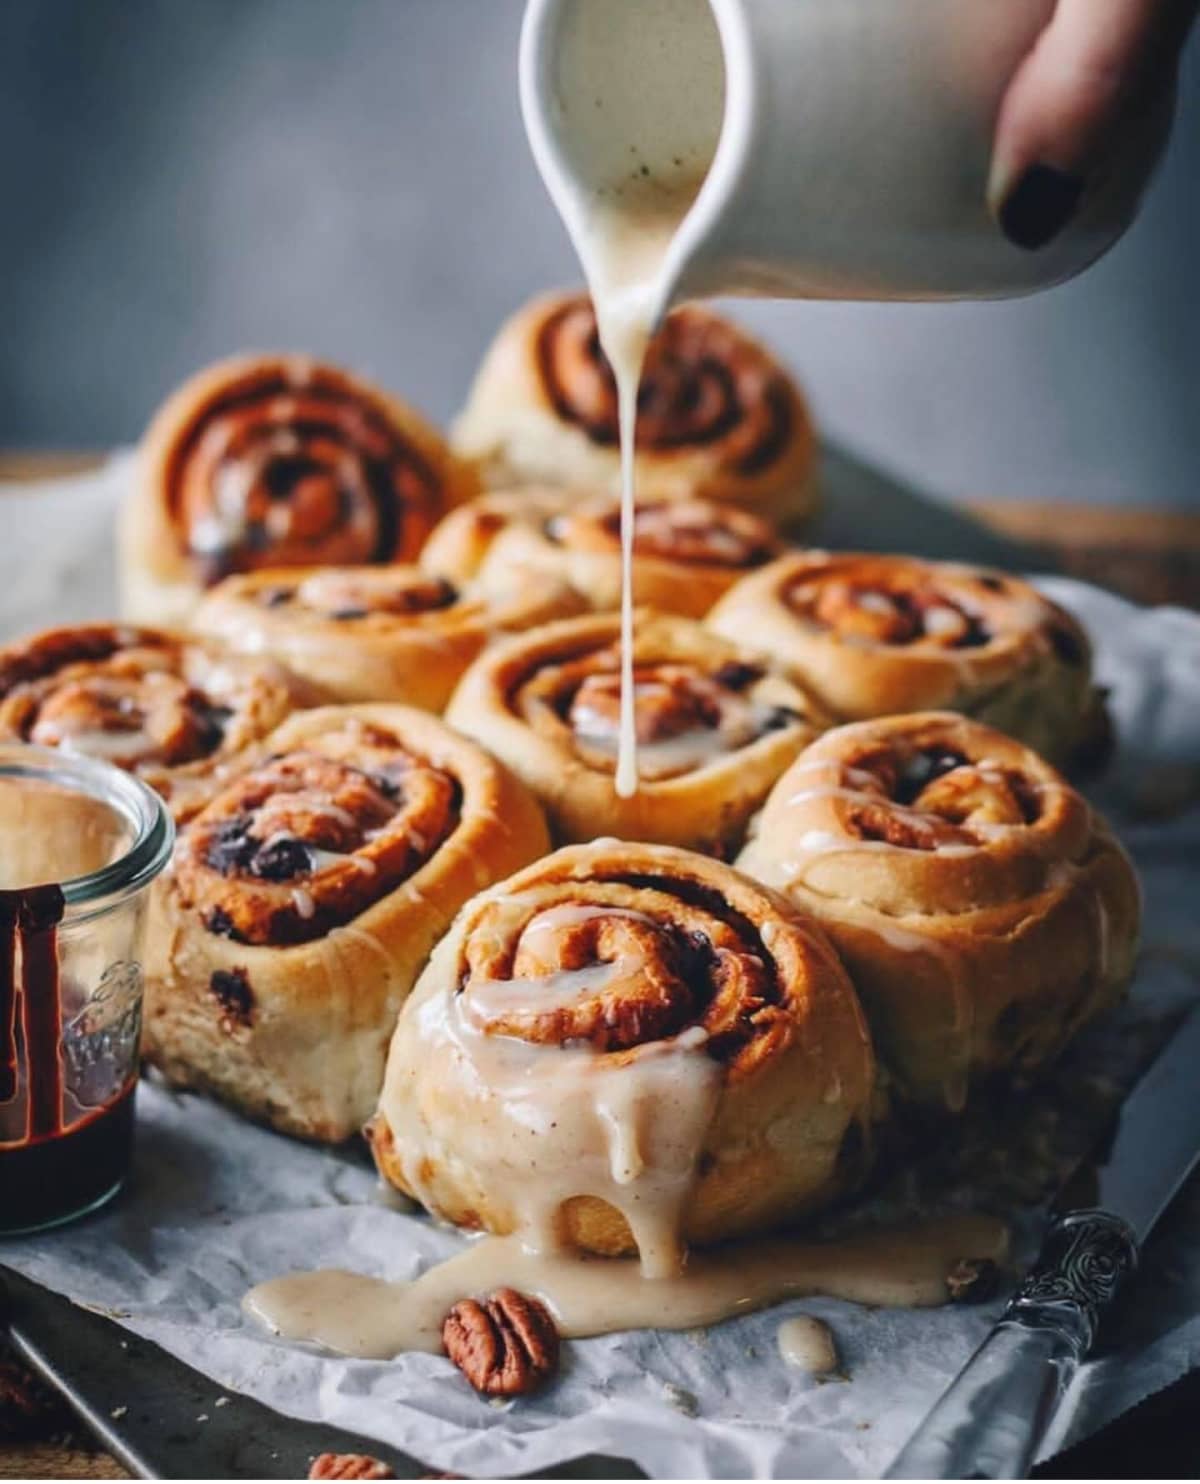 Icing being poured over a sheet tray of cinnamon buns.